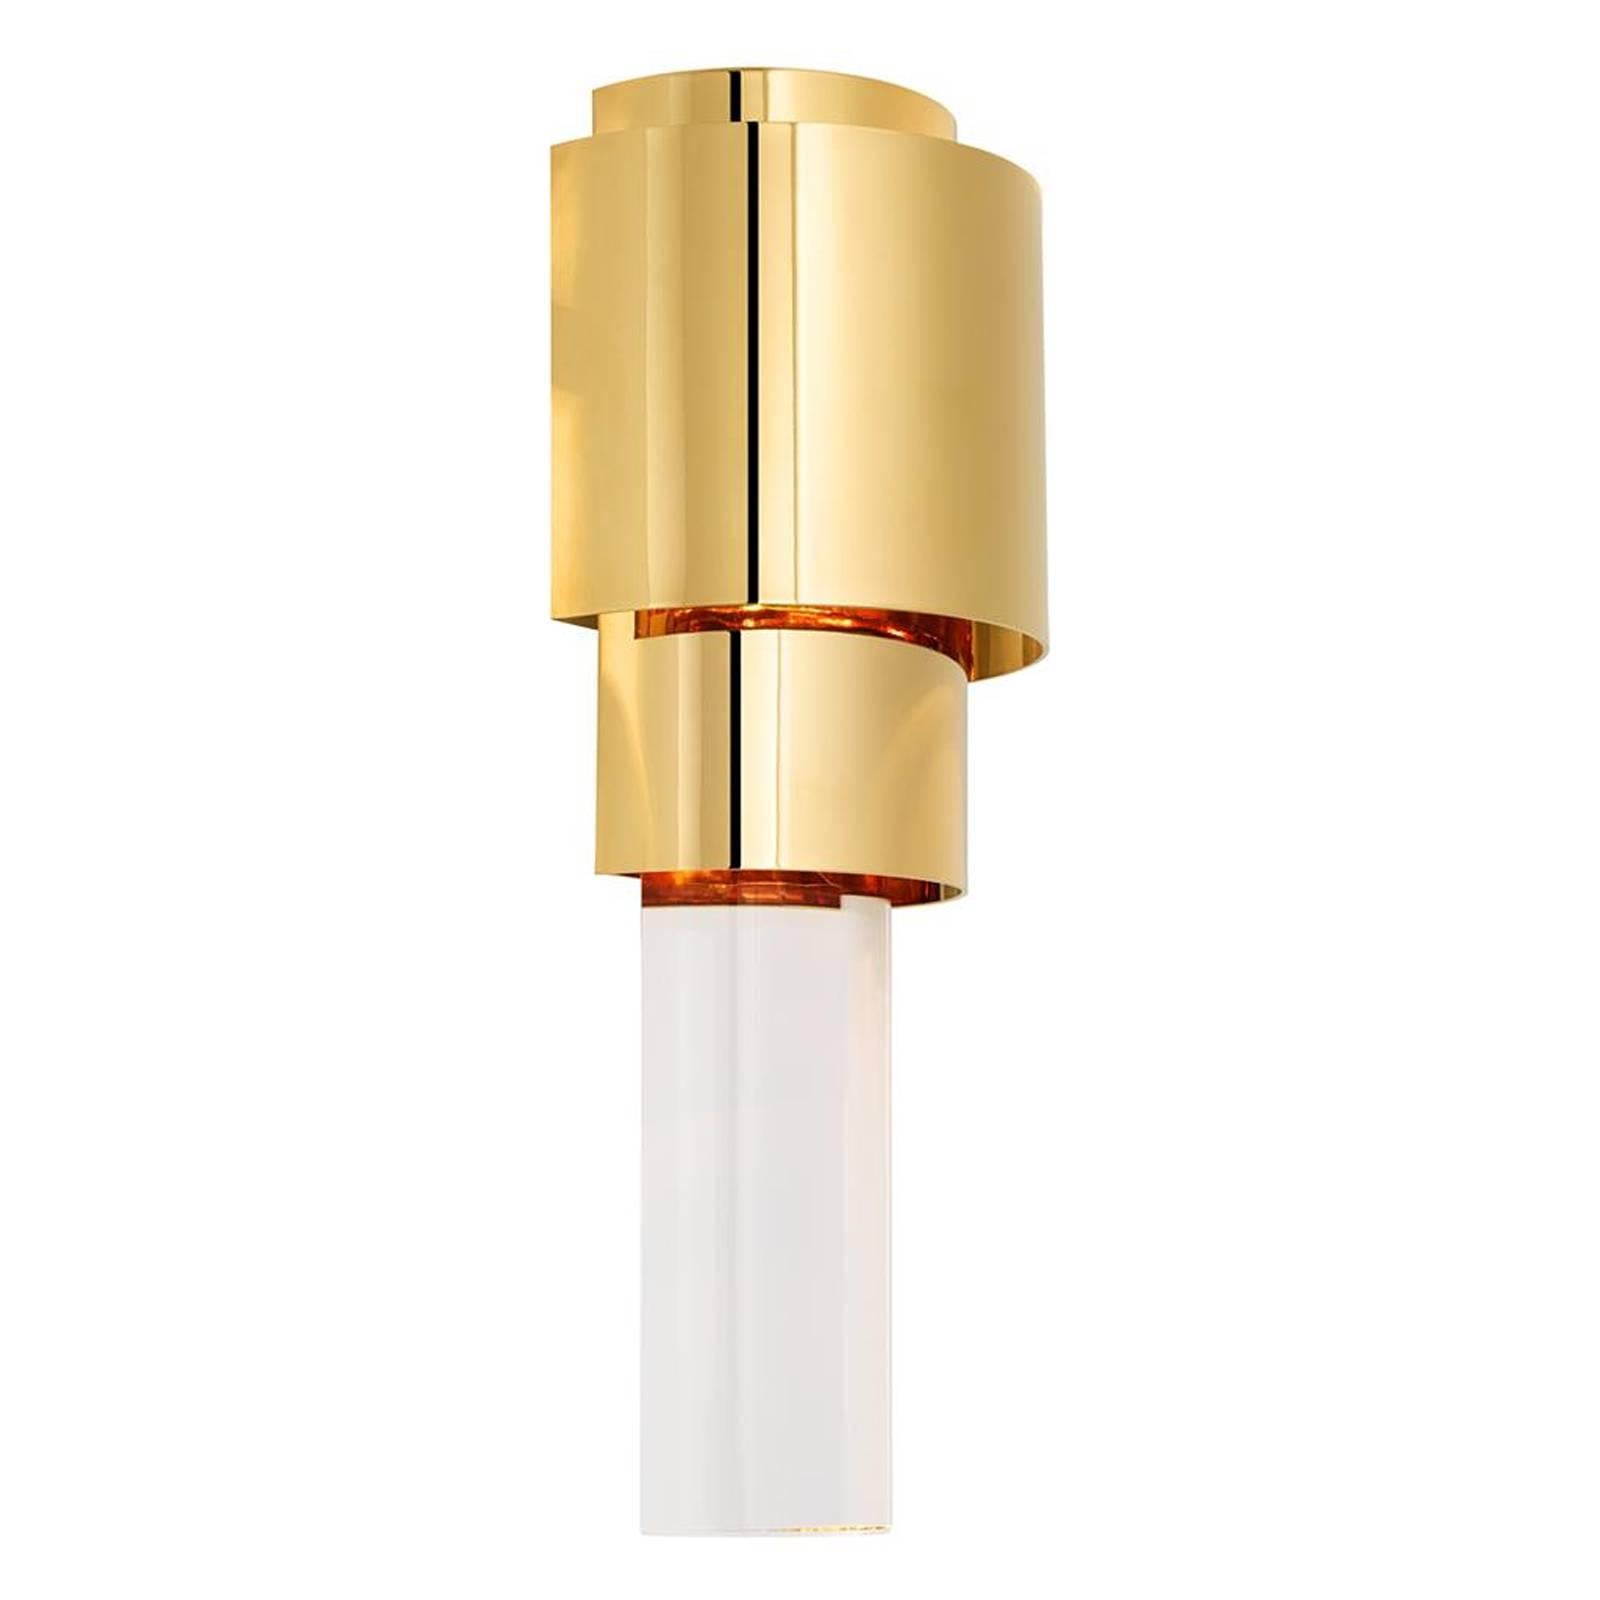 Wall lamp royale with crystal glass base and 
structure in polished stainless steel in gold finish.
Also available with crystal base and structure in
nickel finish or in bronze finish.
